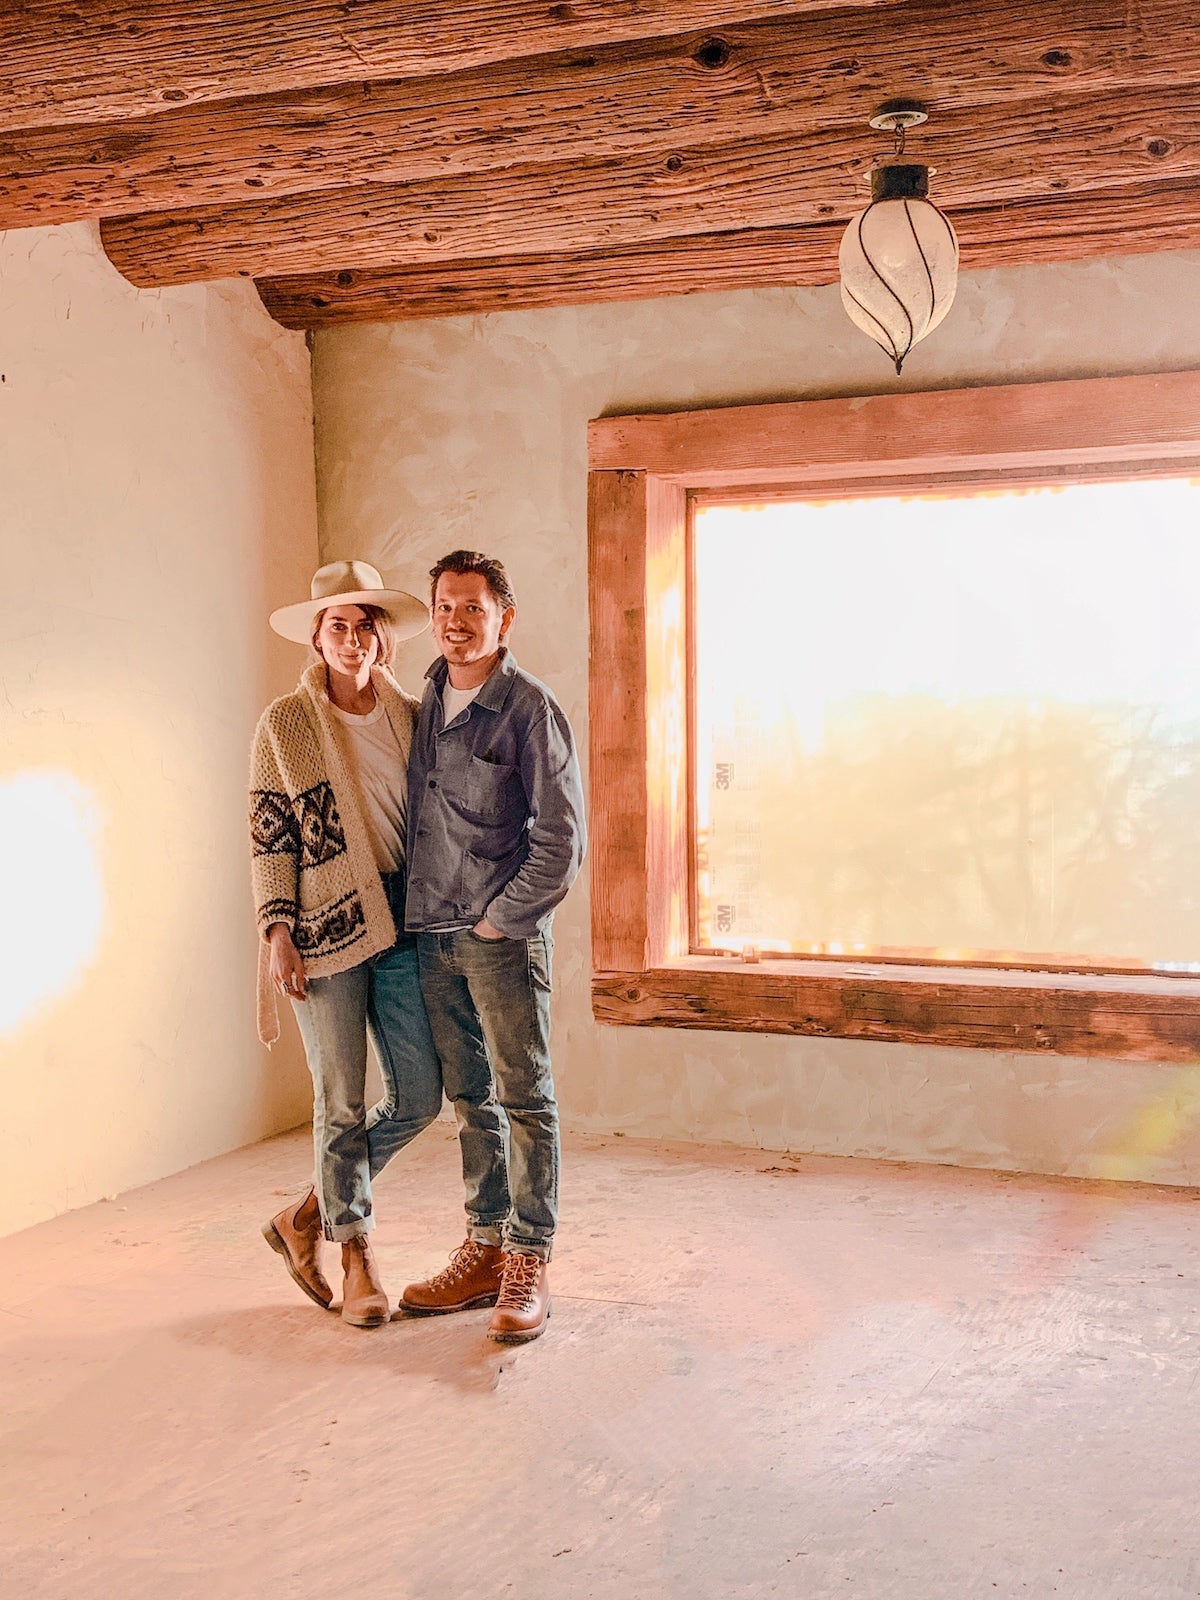 Sara and Rich stand in an empty room being renovated at the Joshua Tree House